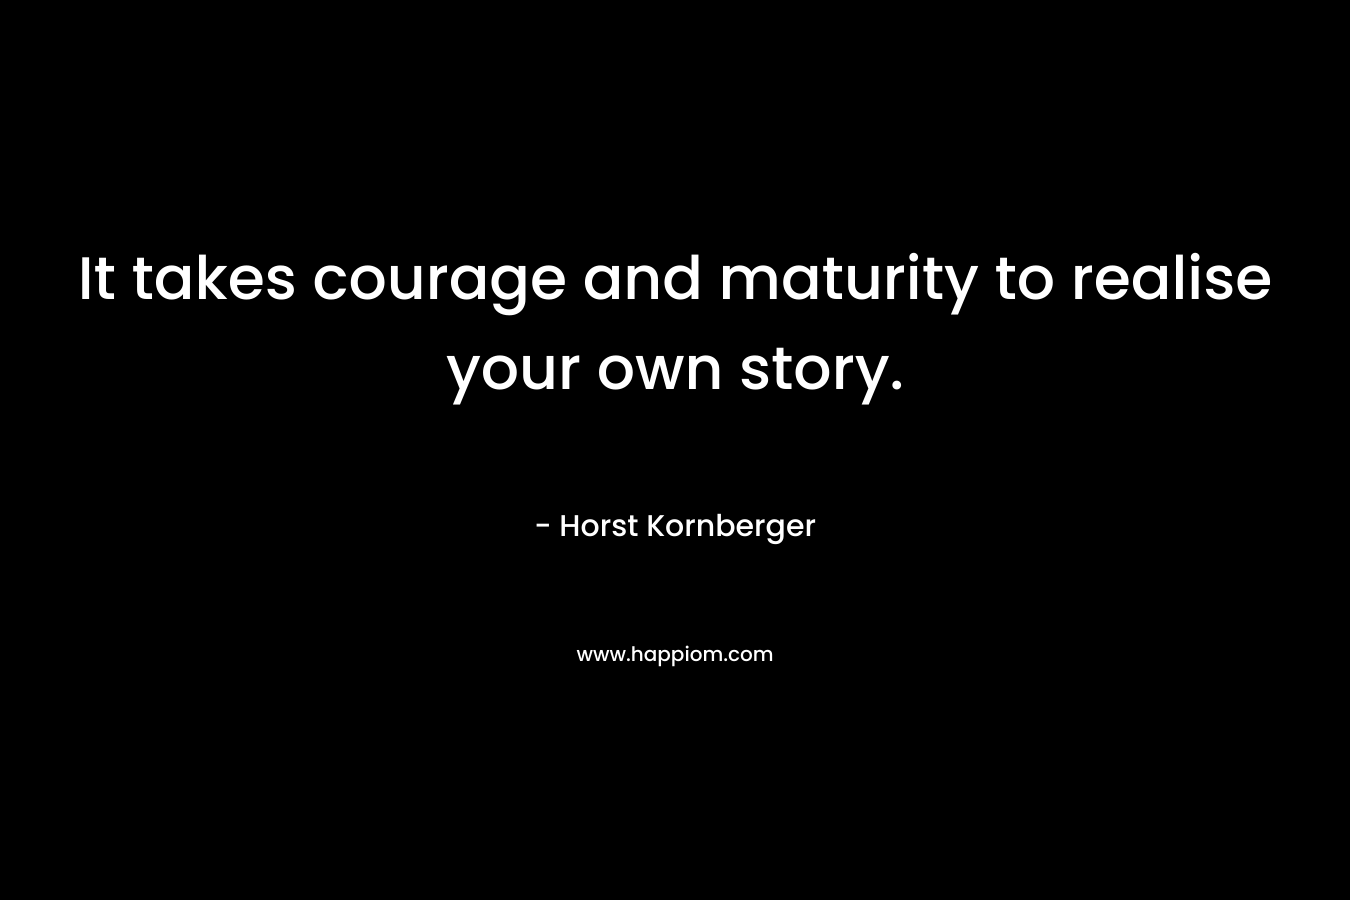 It takes courage and maturity to realise your own story.